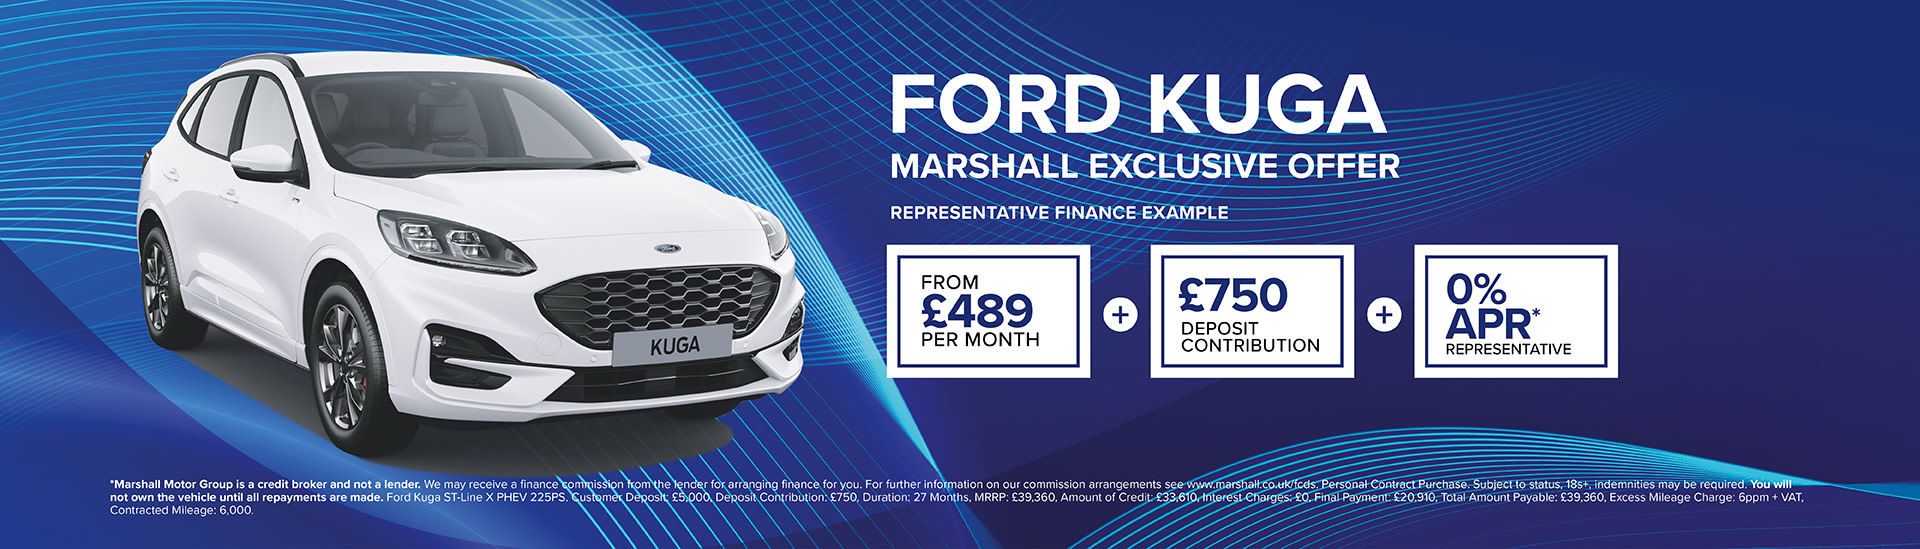 Ford Kuga Personal Contract Purchase Exclusive Offer